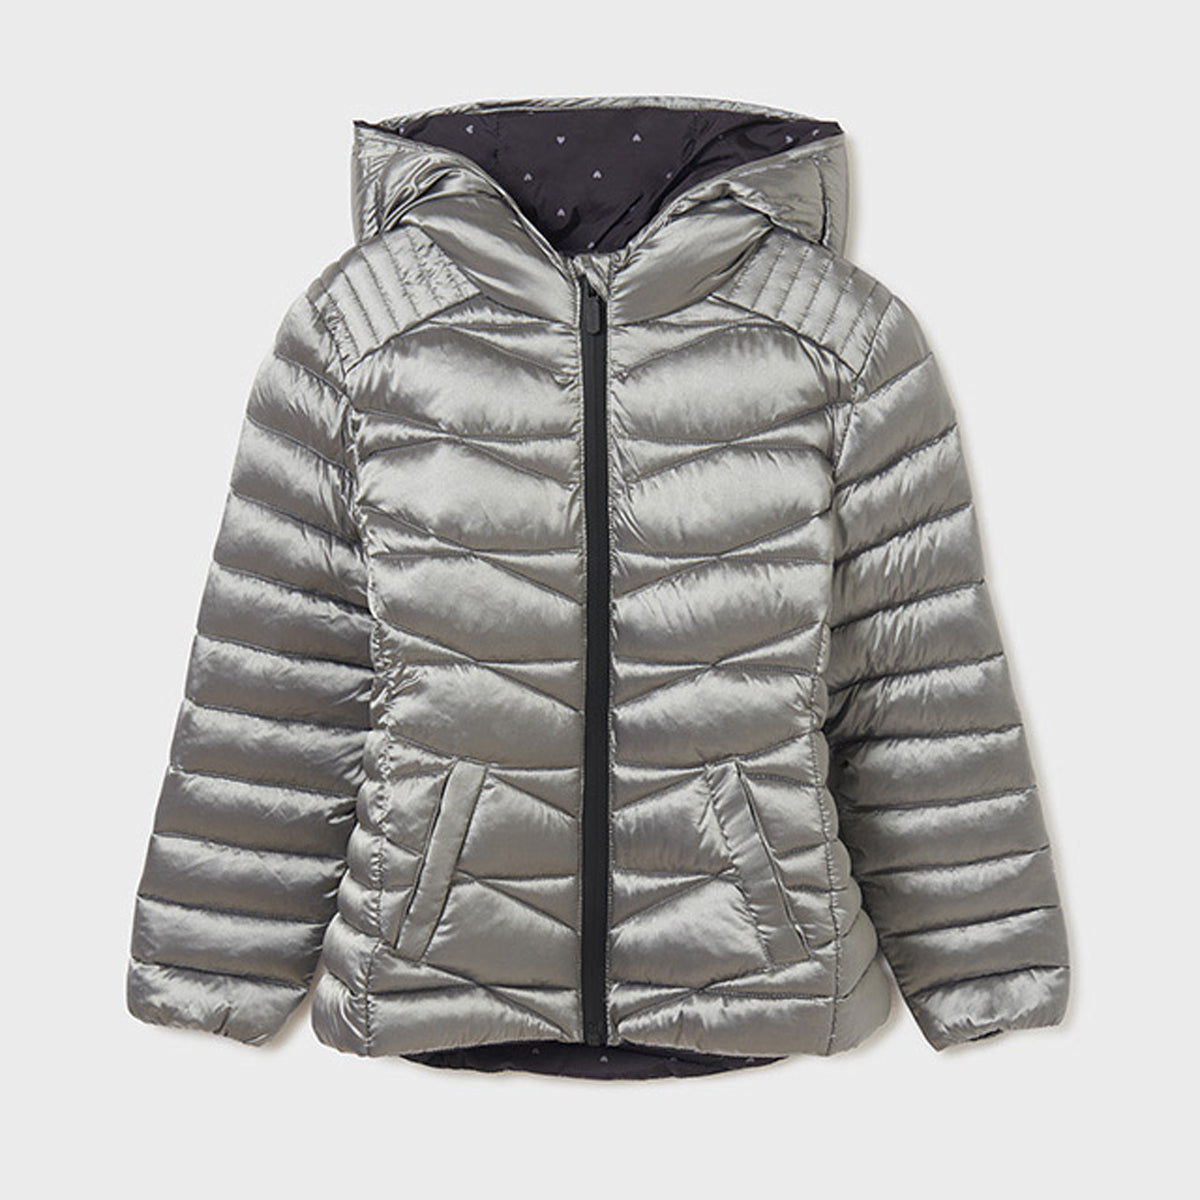 Shadow Grey Soft Quilted Ecofriends Jacket